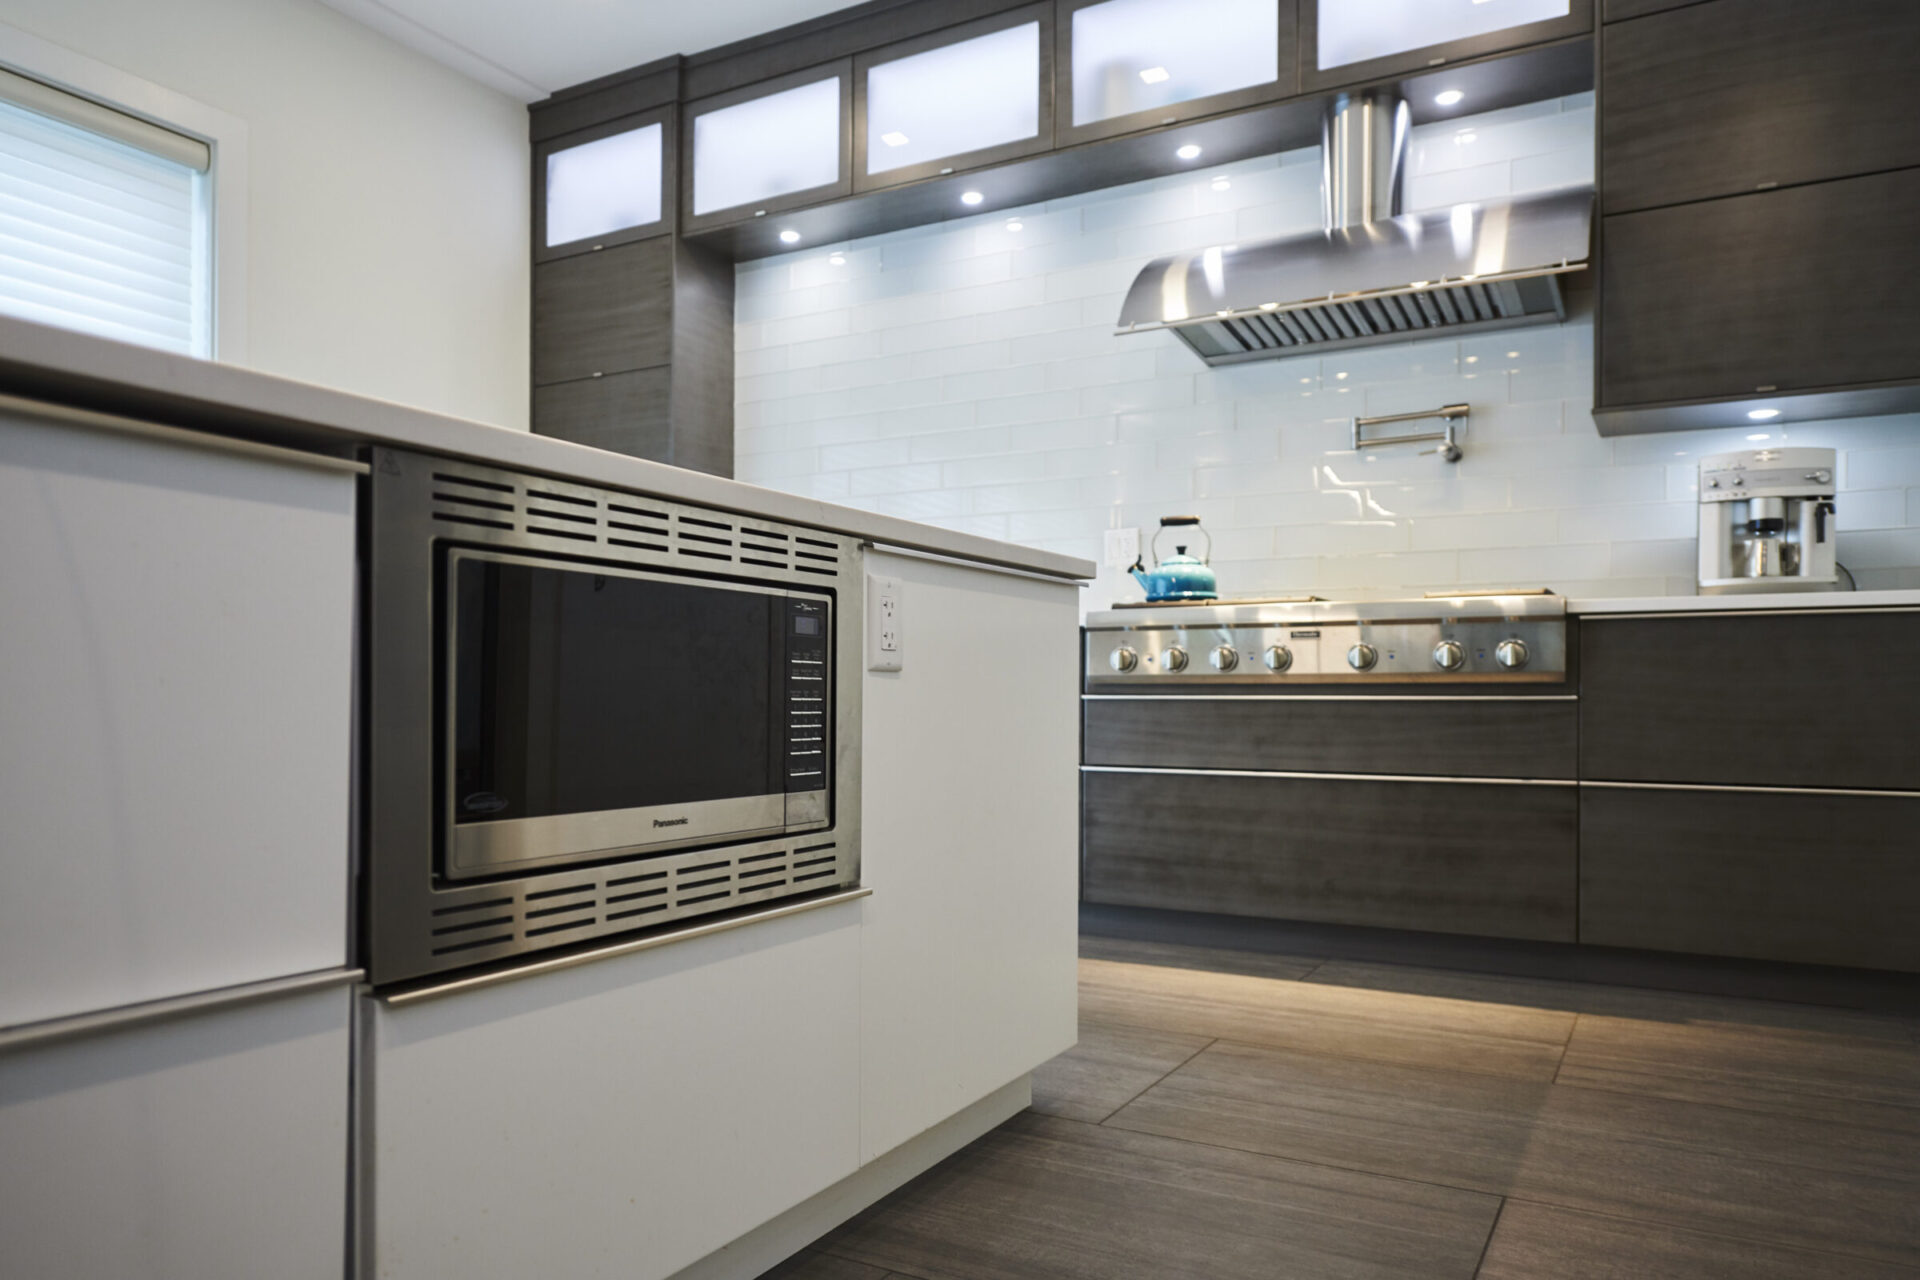 Modern kitchen with stainless steel appliances, dark wooden cabinets, white subway tiles, and a range hood over a stove, featuring a clean design.